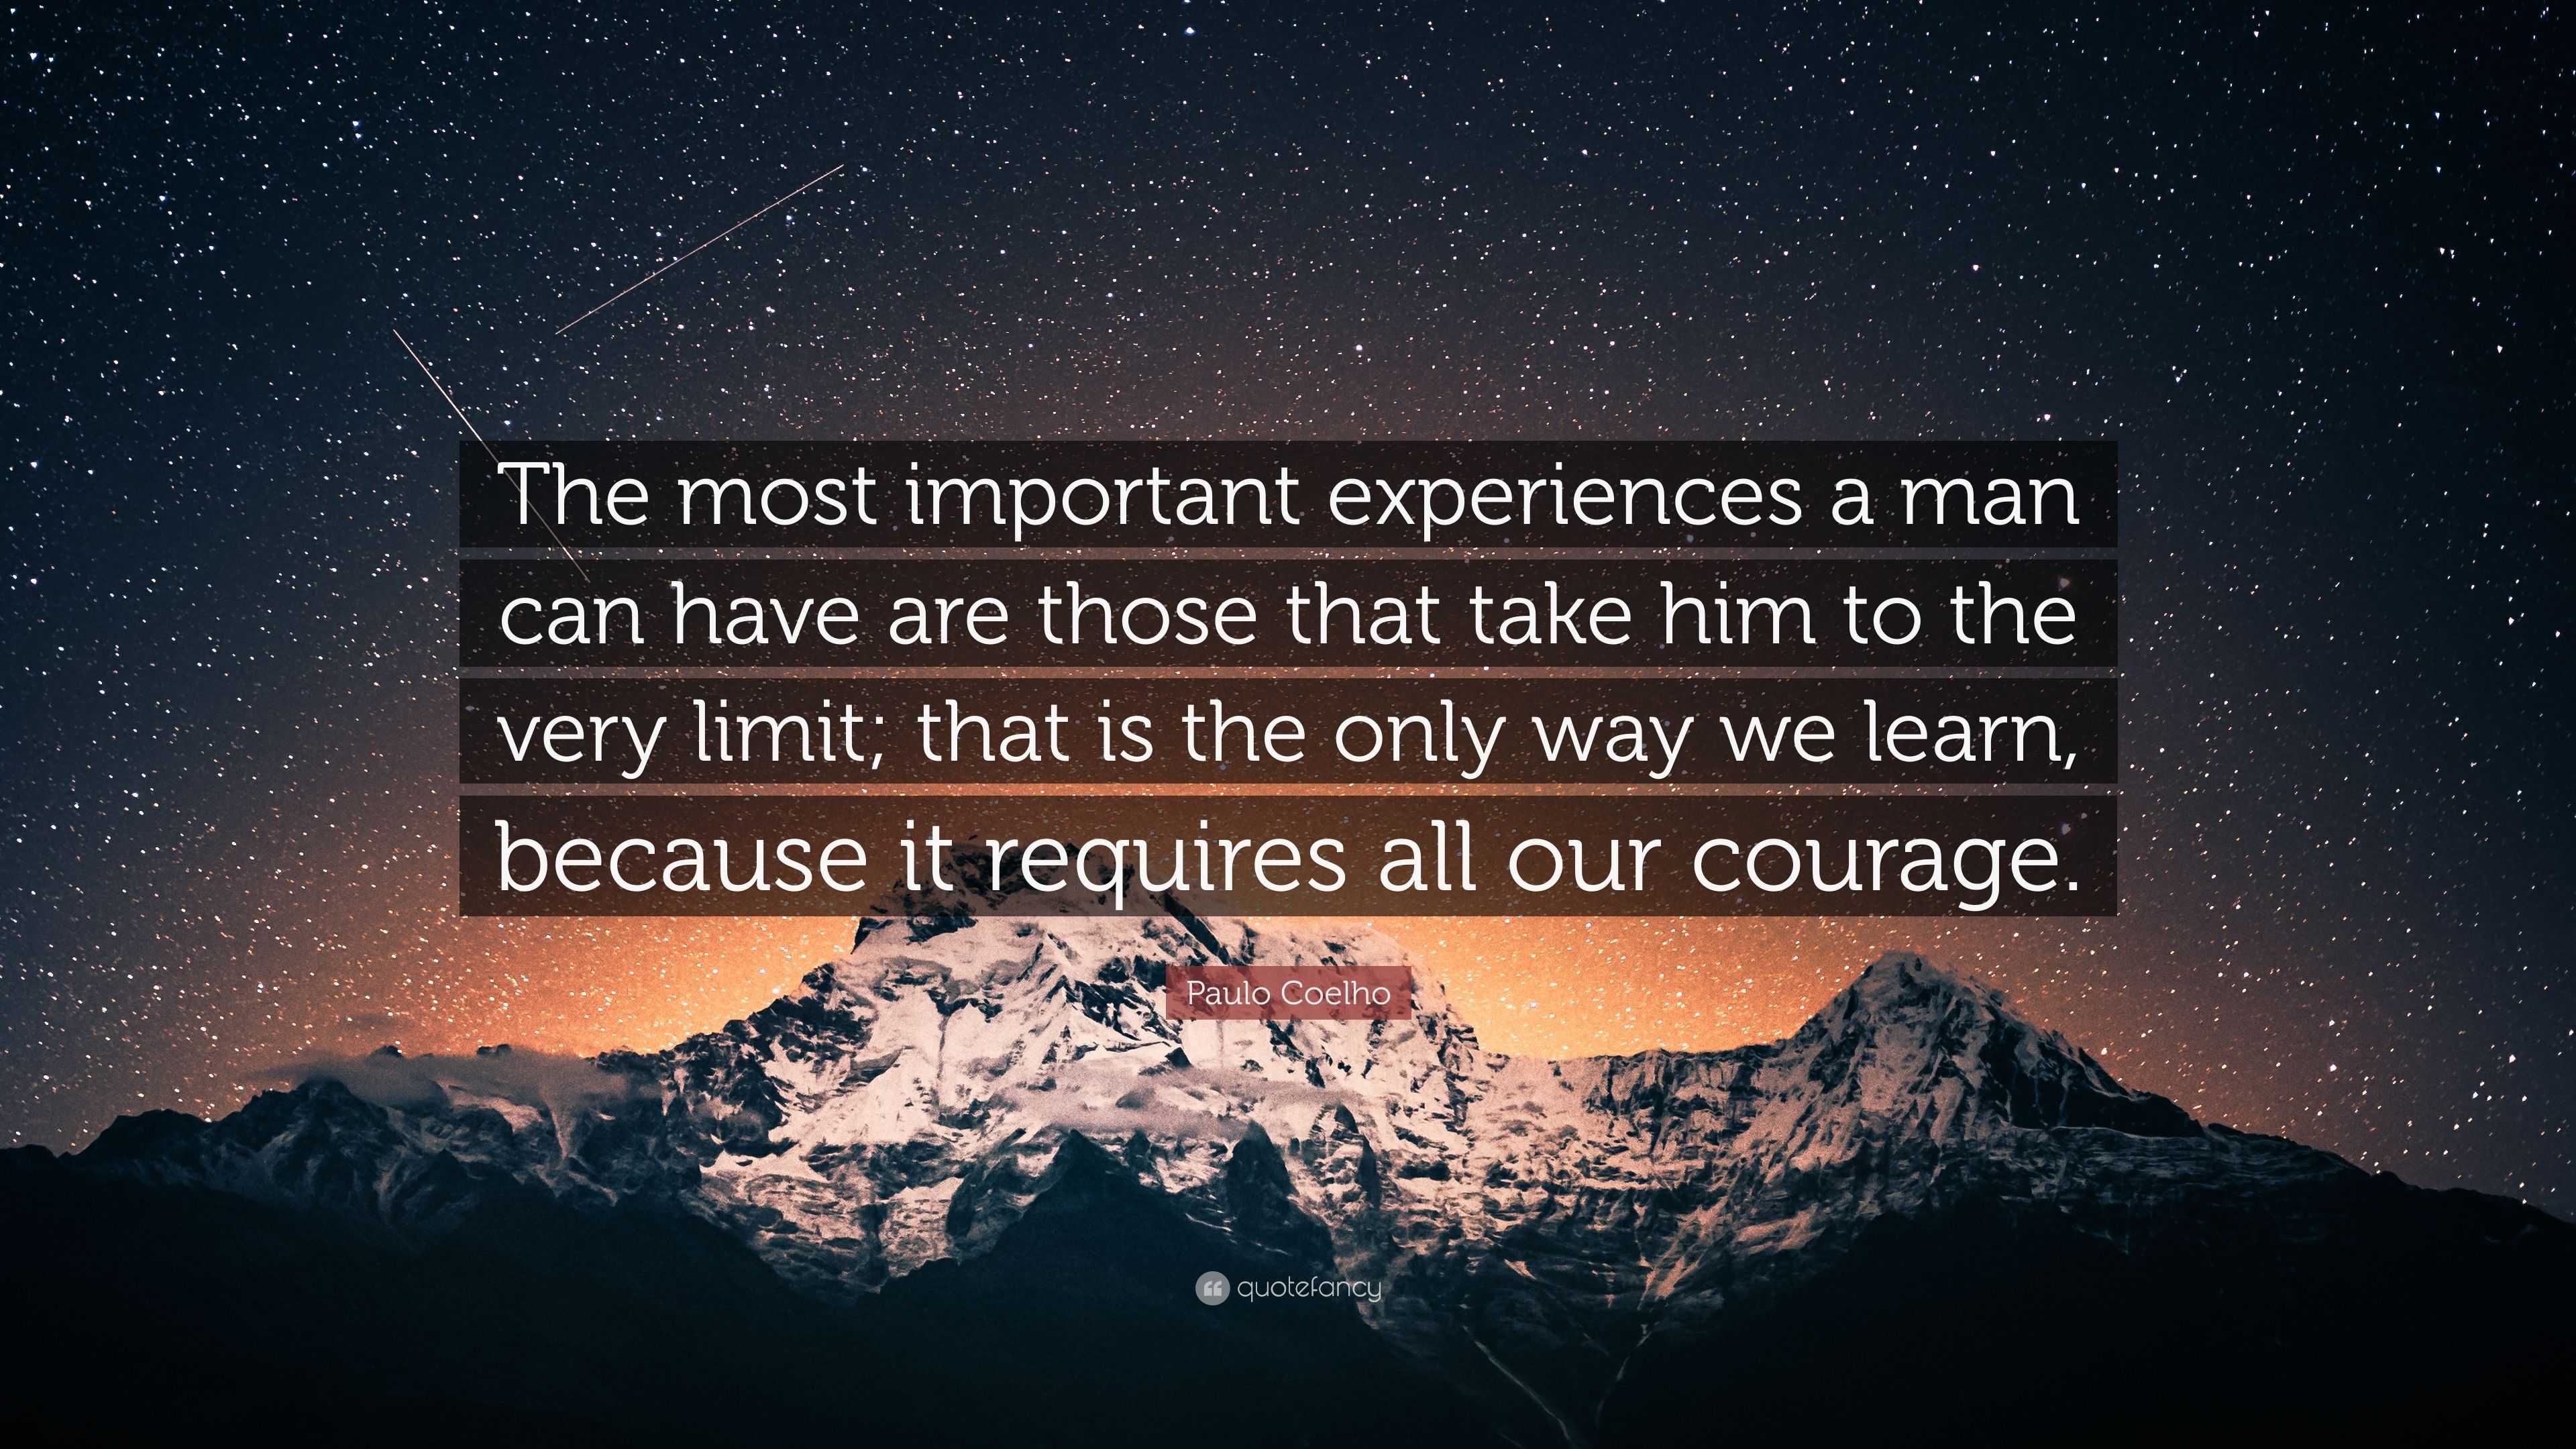 Paulo Coelho on X: “One needs serenity to take the most important